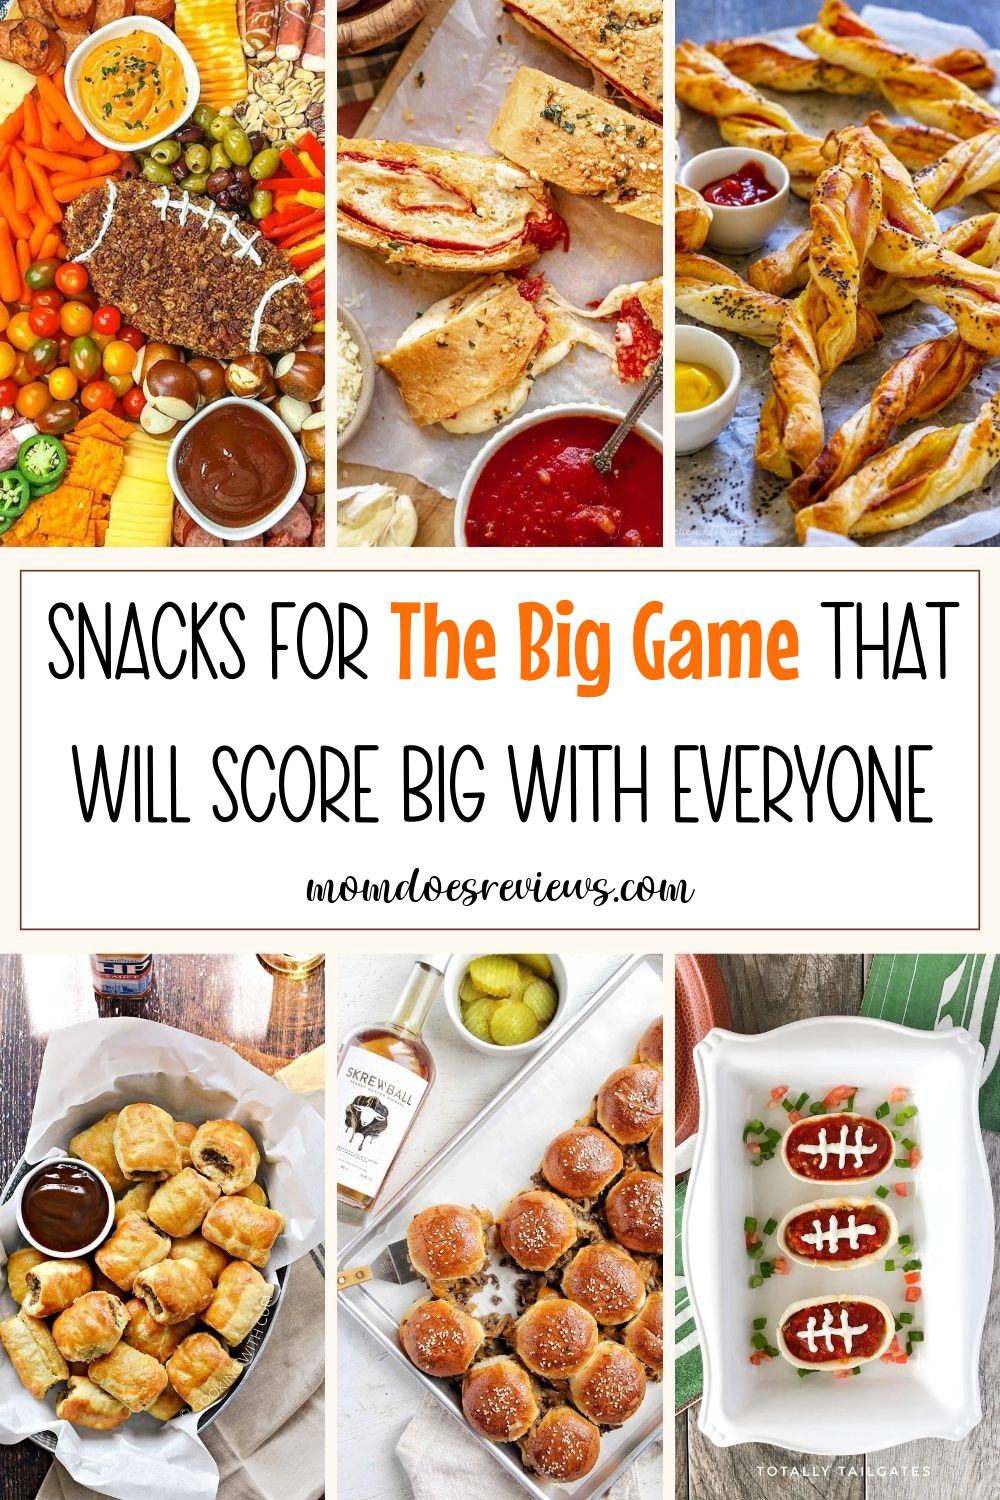 Snacks for the Big Game that Score Big with Everyone!